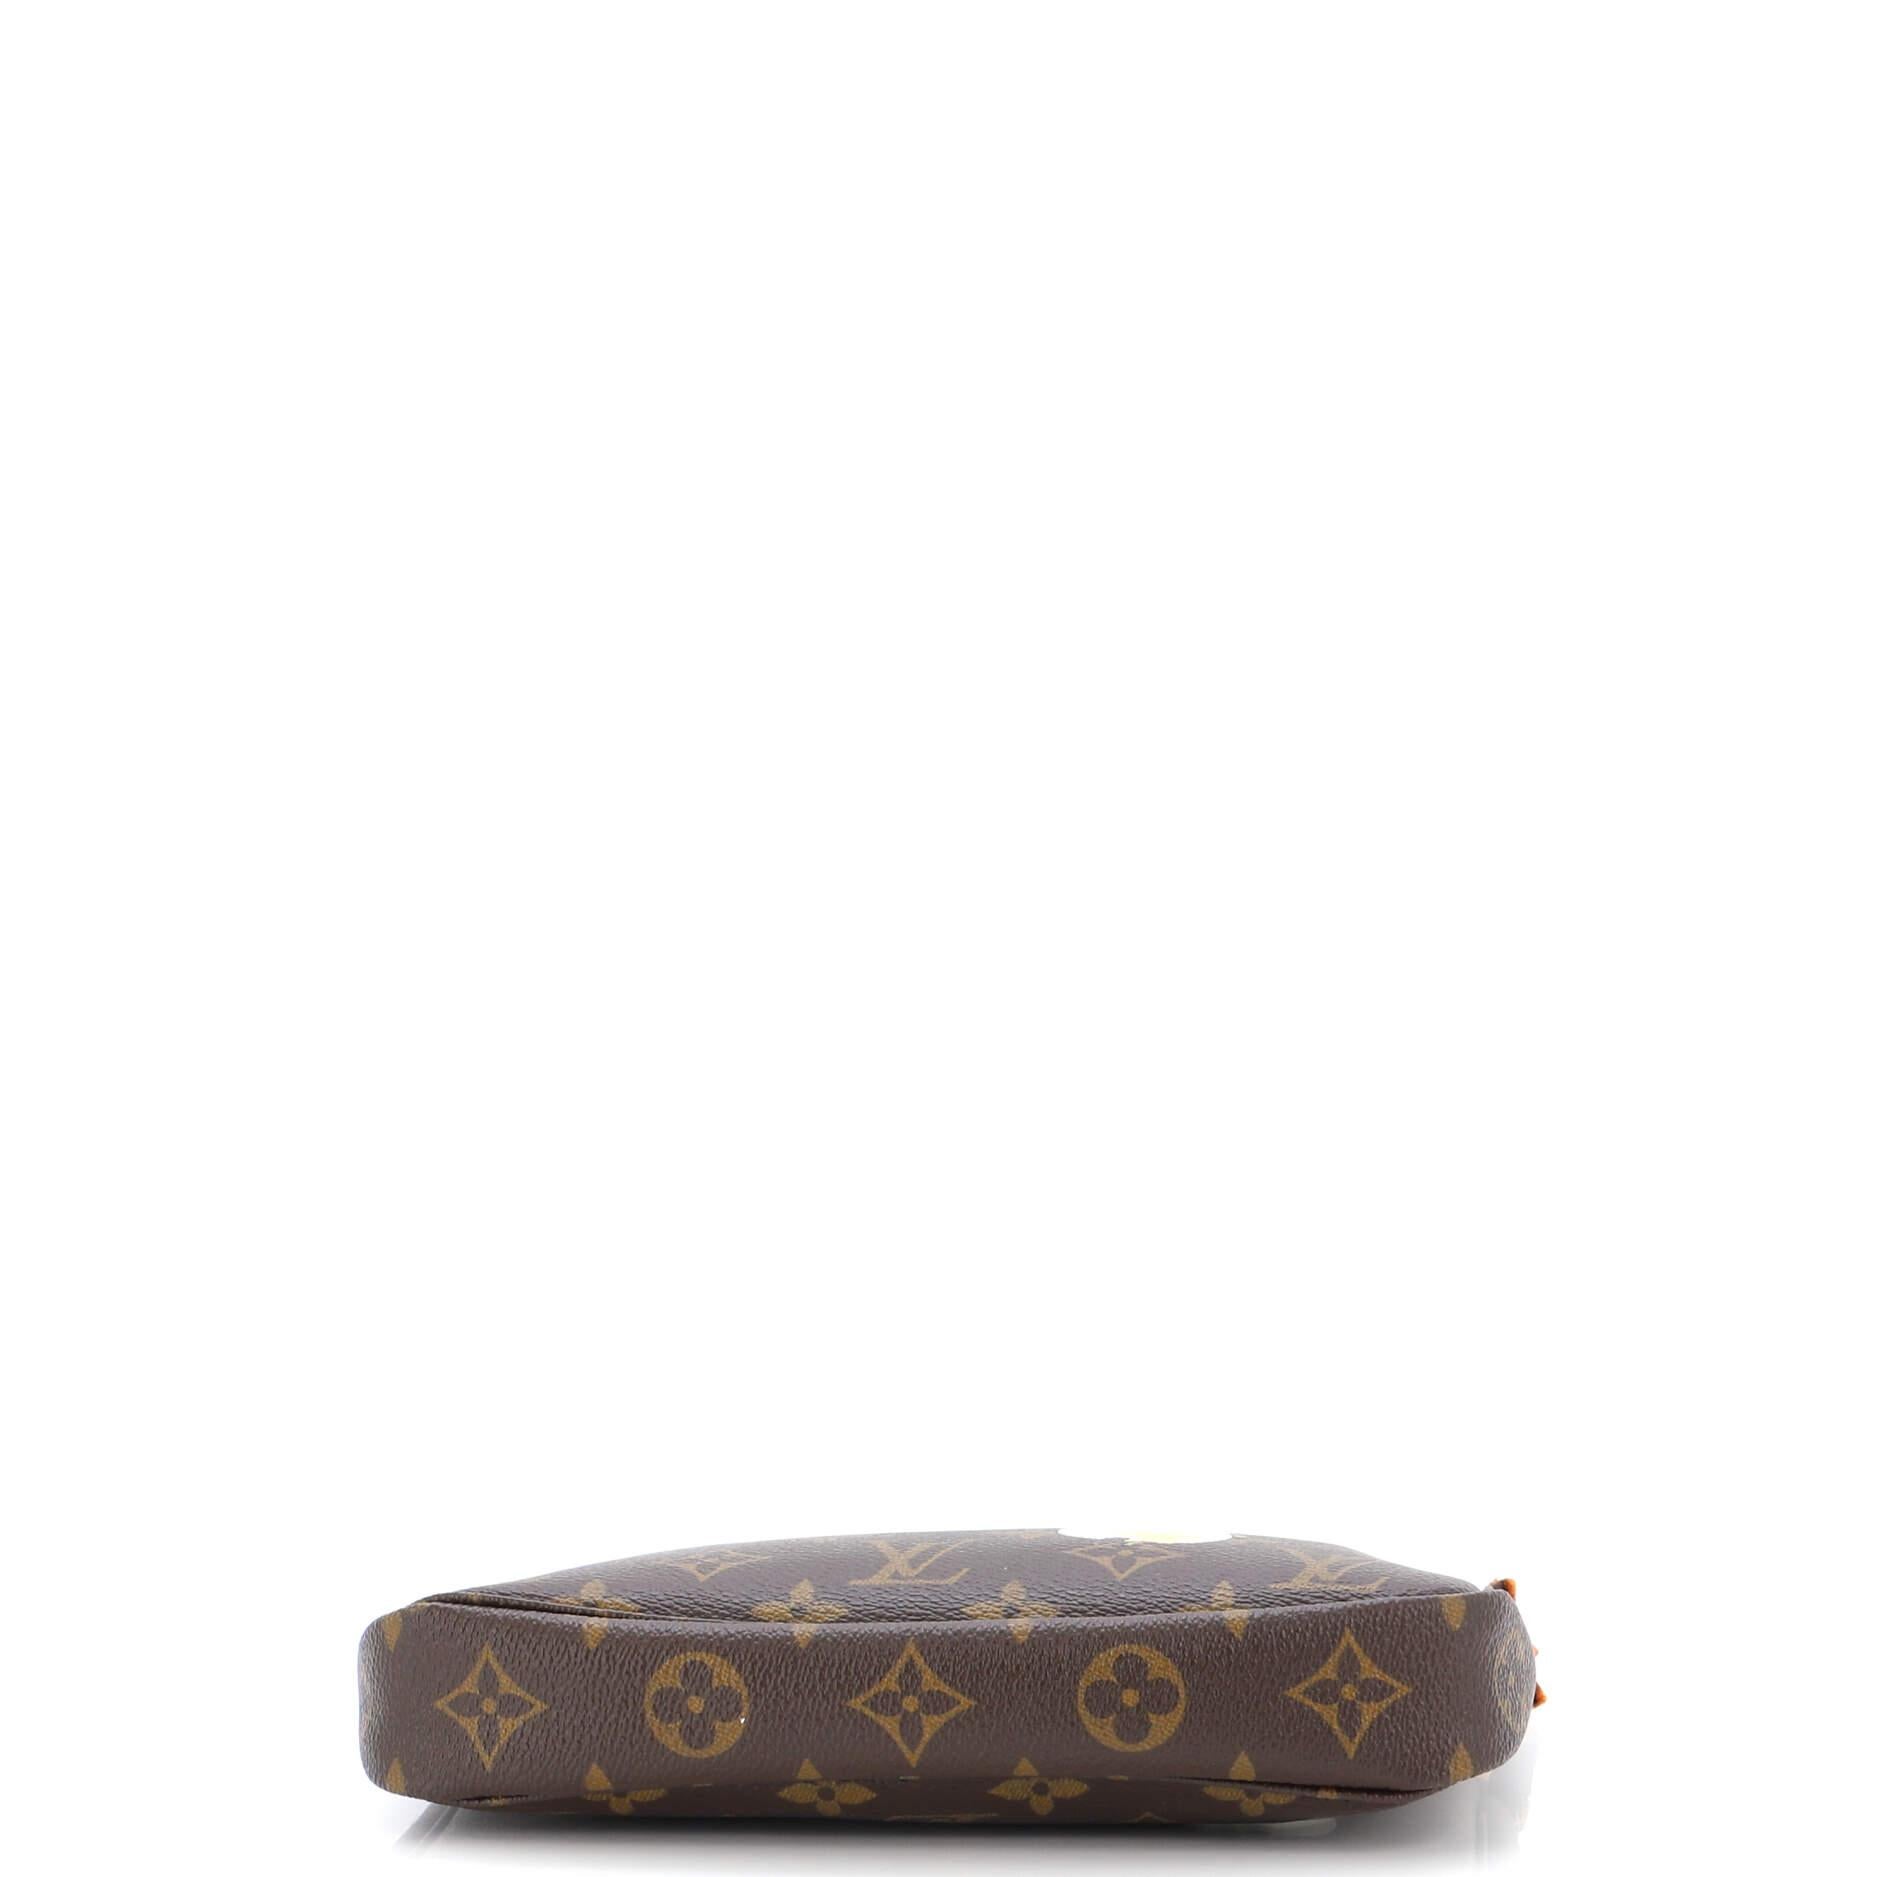 Louis Vuitton Pochette Accessoires Limited Edition Monogram Murakami Panda In Good Condition For Sale In NY, NY